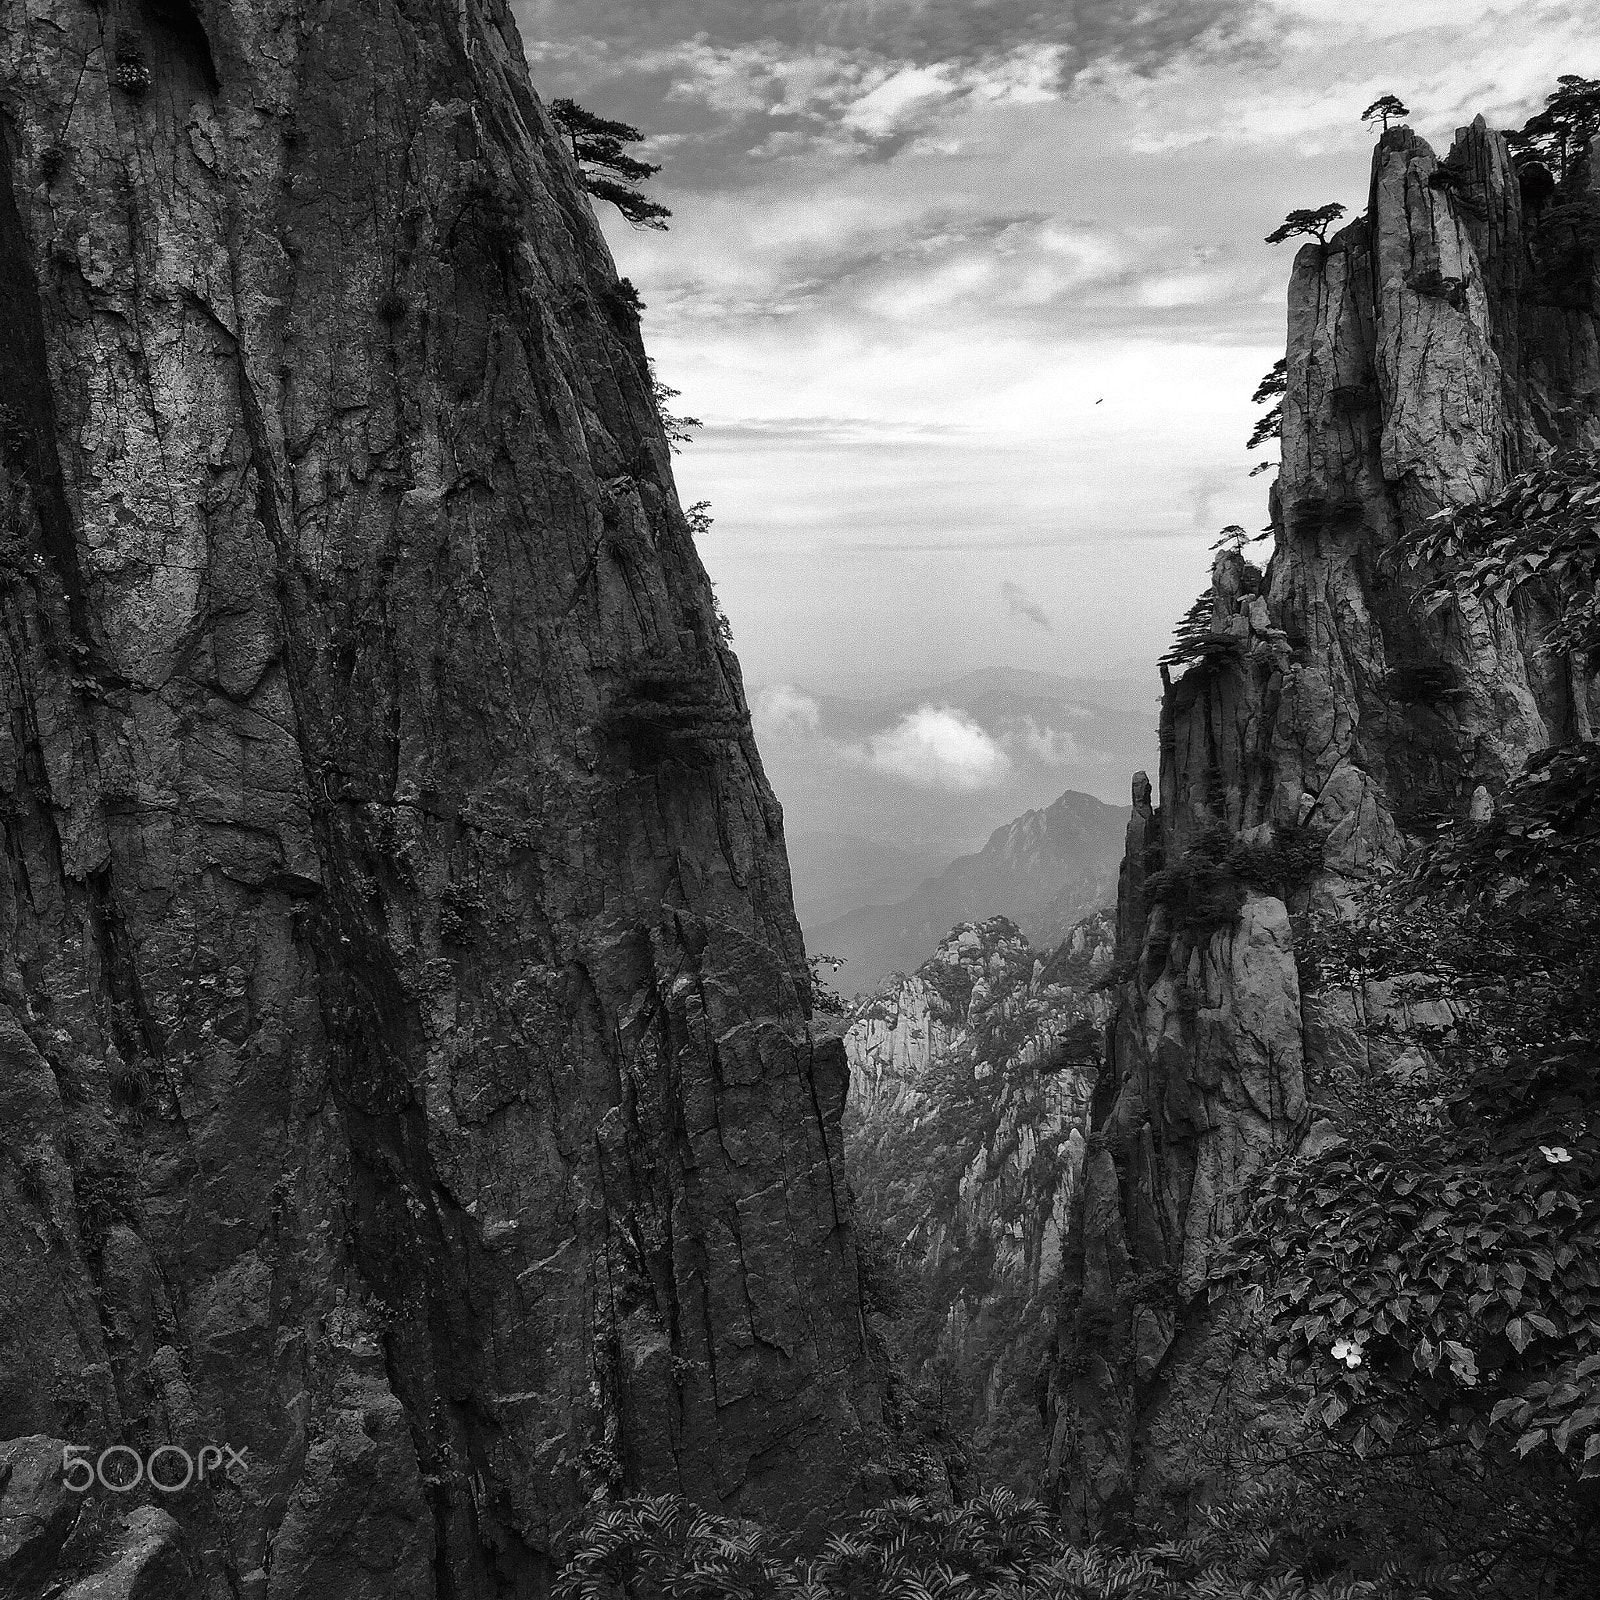 Jag.gr 645 PRO Mk III for Apple iPhone 6 sample photo. Huangshan photography